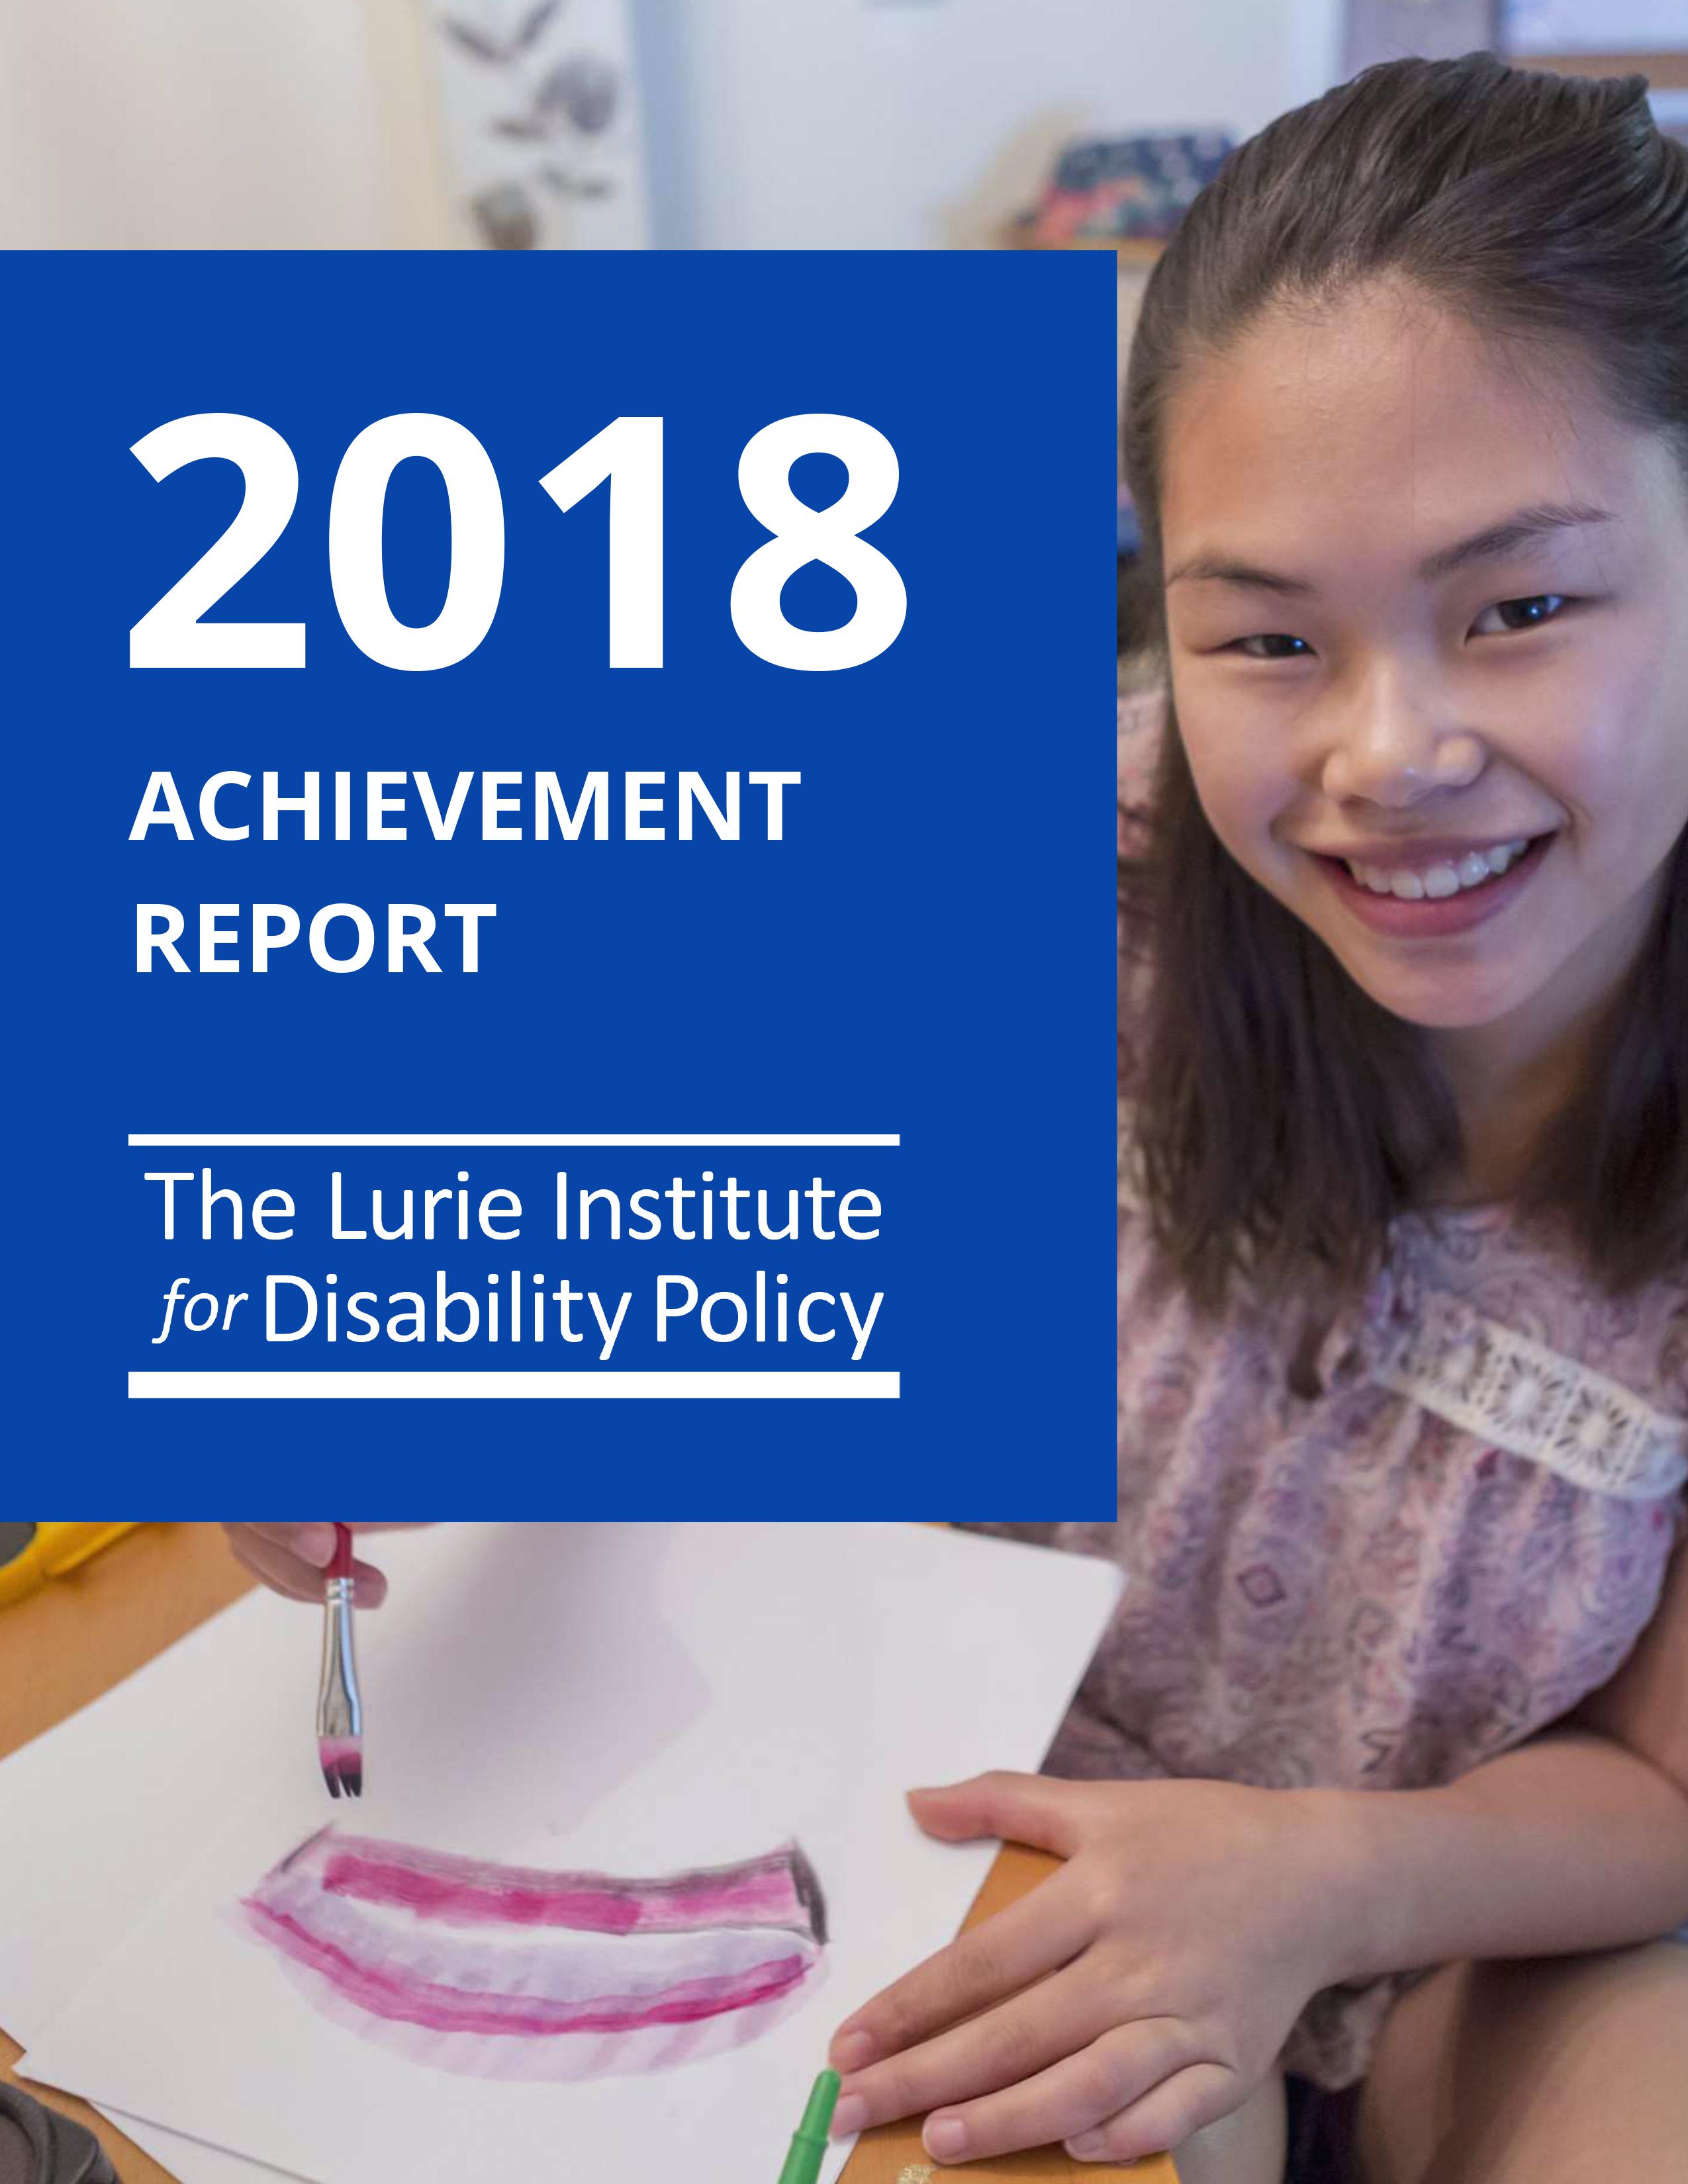 Lurie Institute for Disability Policy- 2018 Achievement Report. An Asian, disabled, teenager is pictured smiling at the camera and painting.